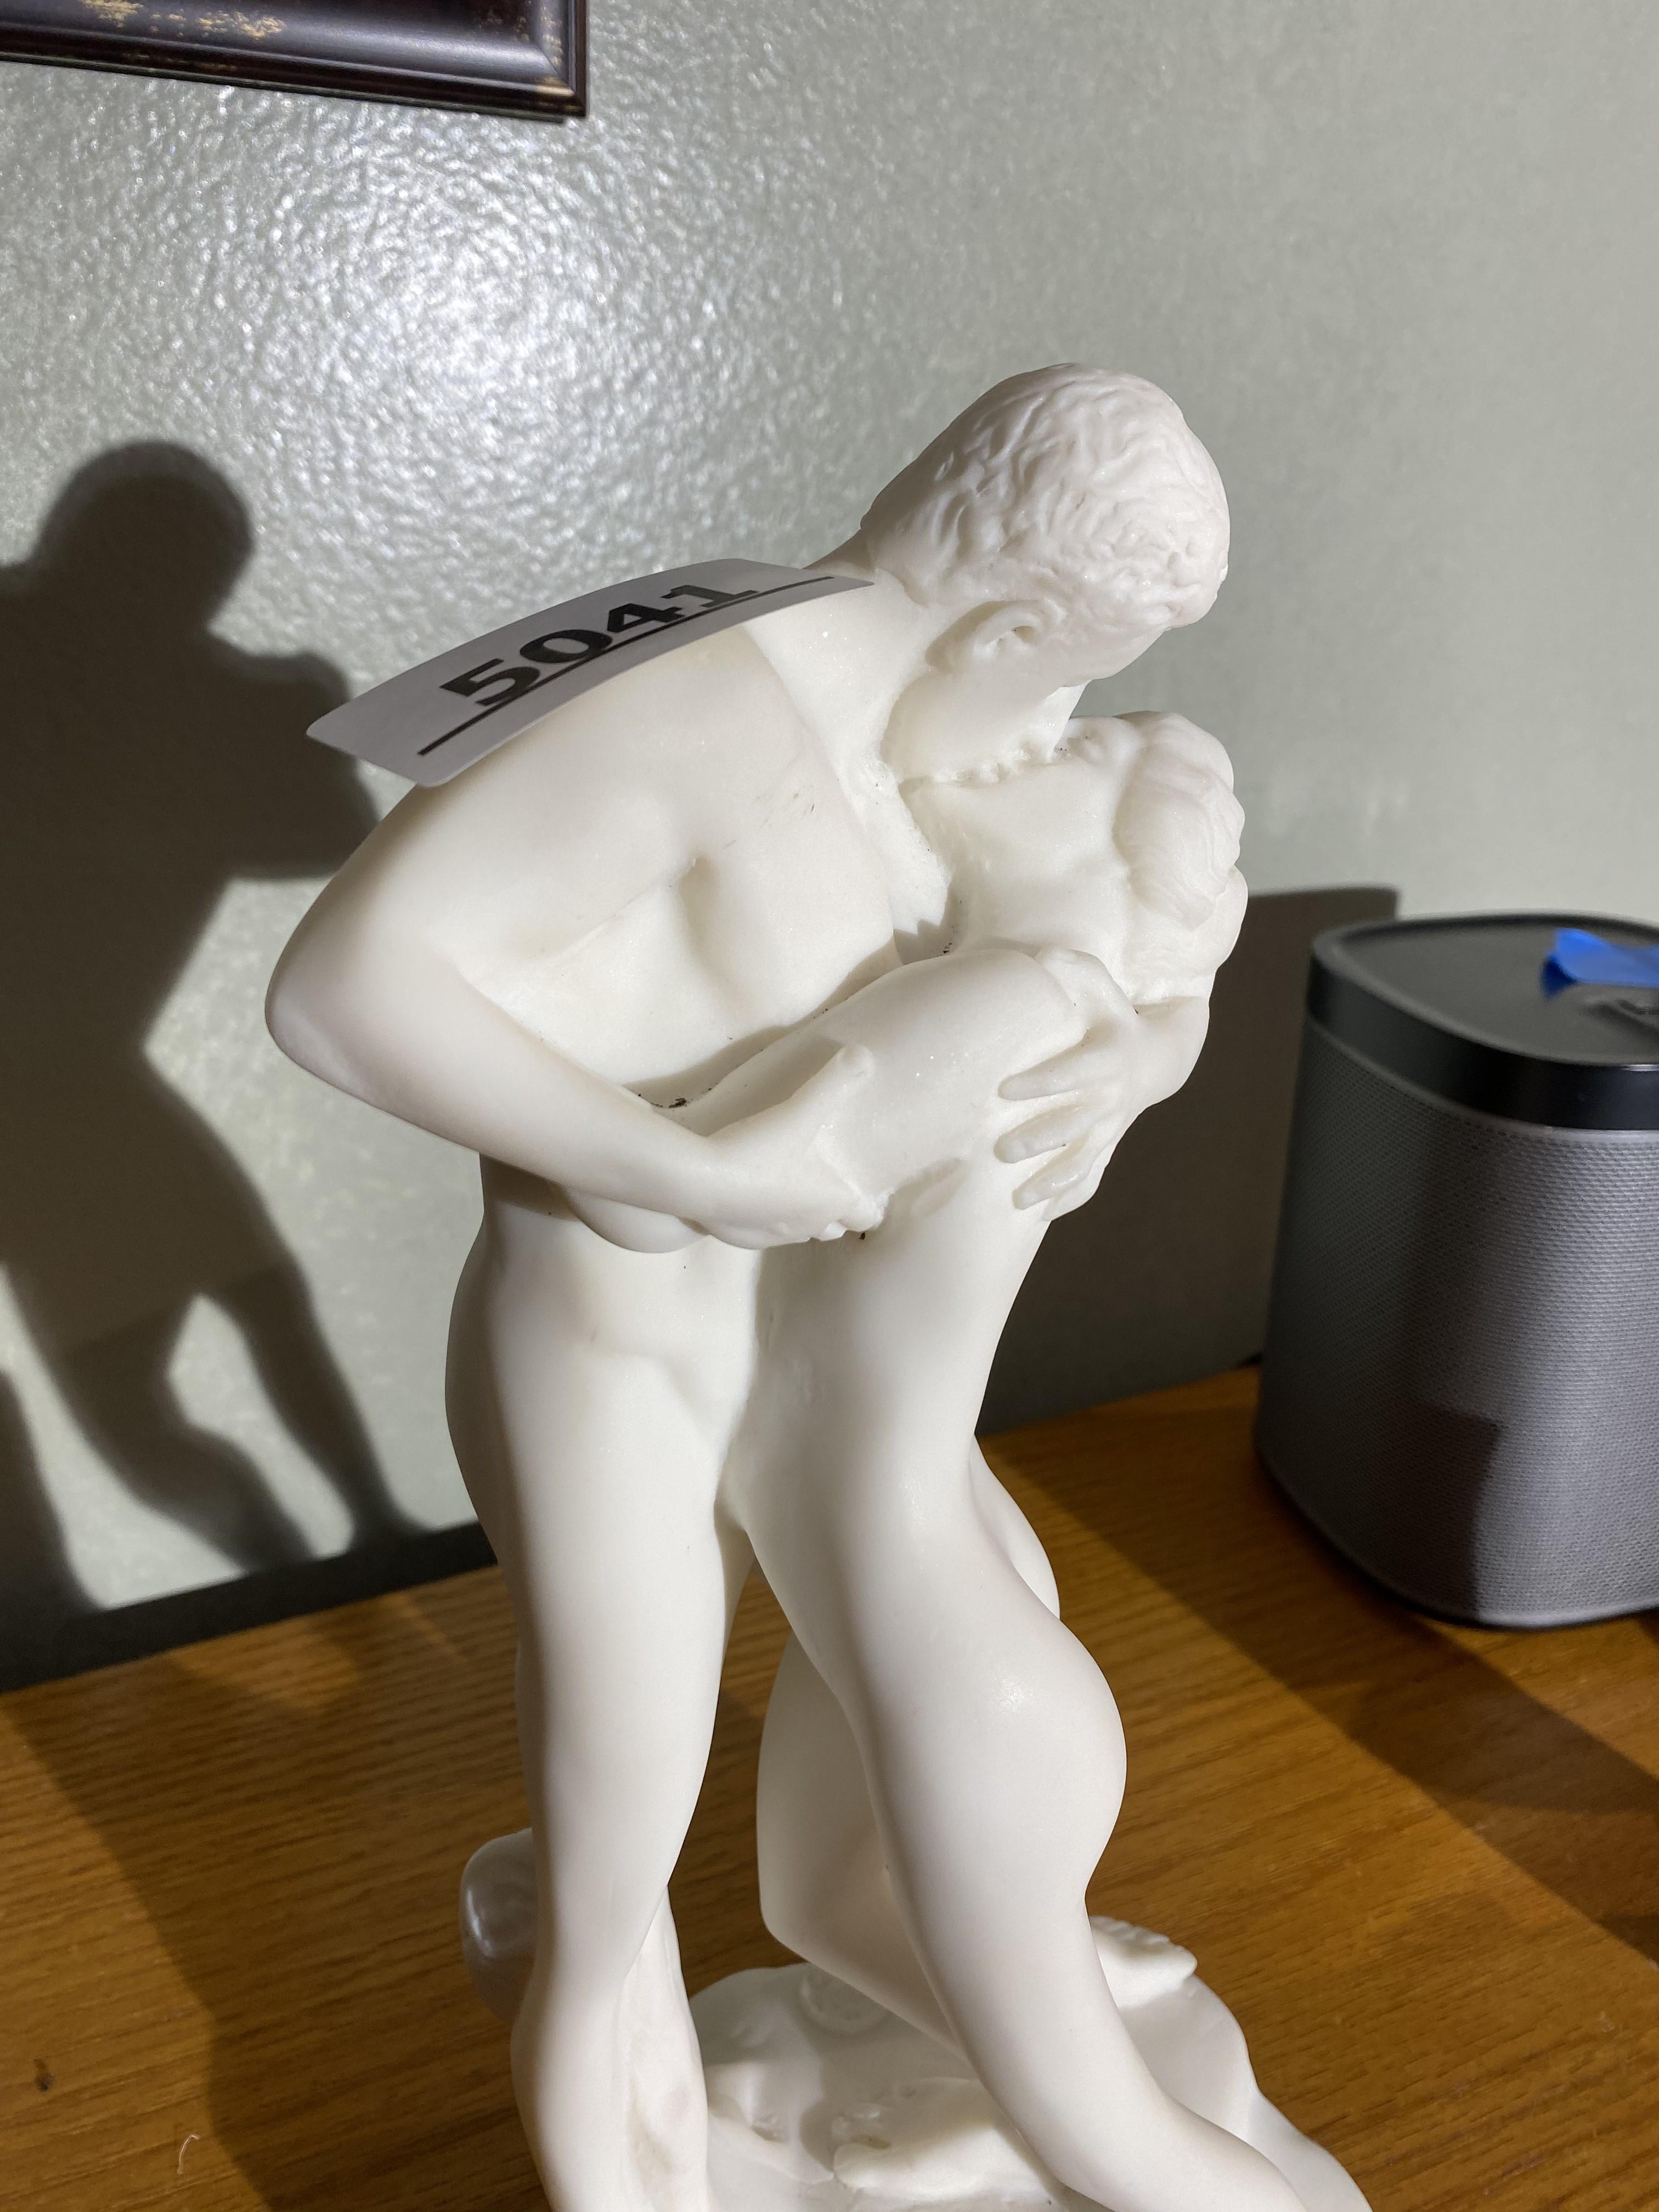 Alabaster sculpture or statue of man and woman kissing